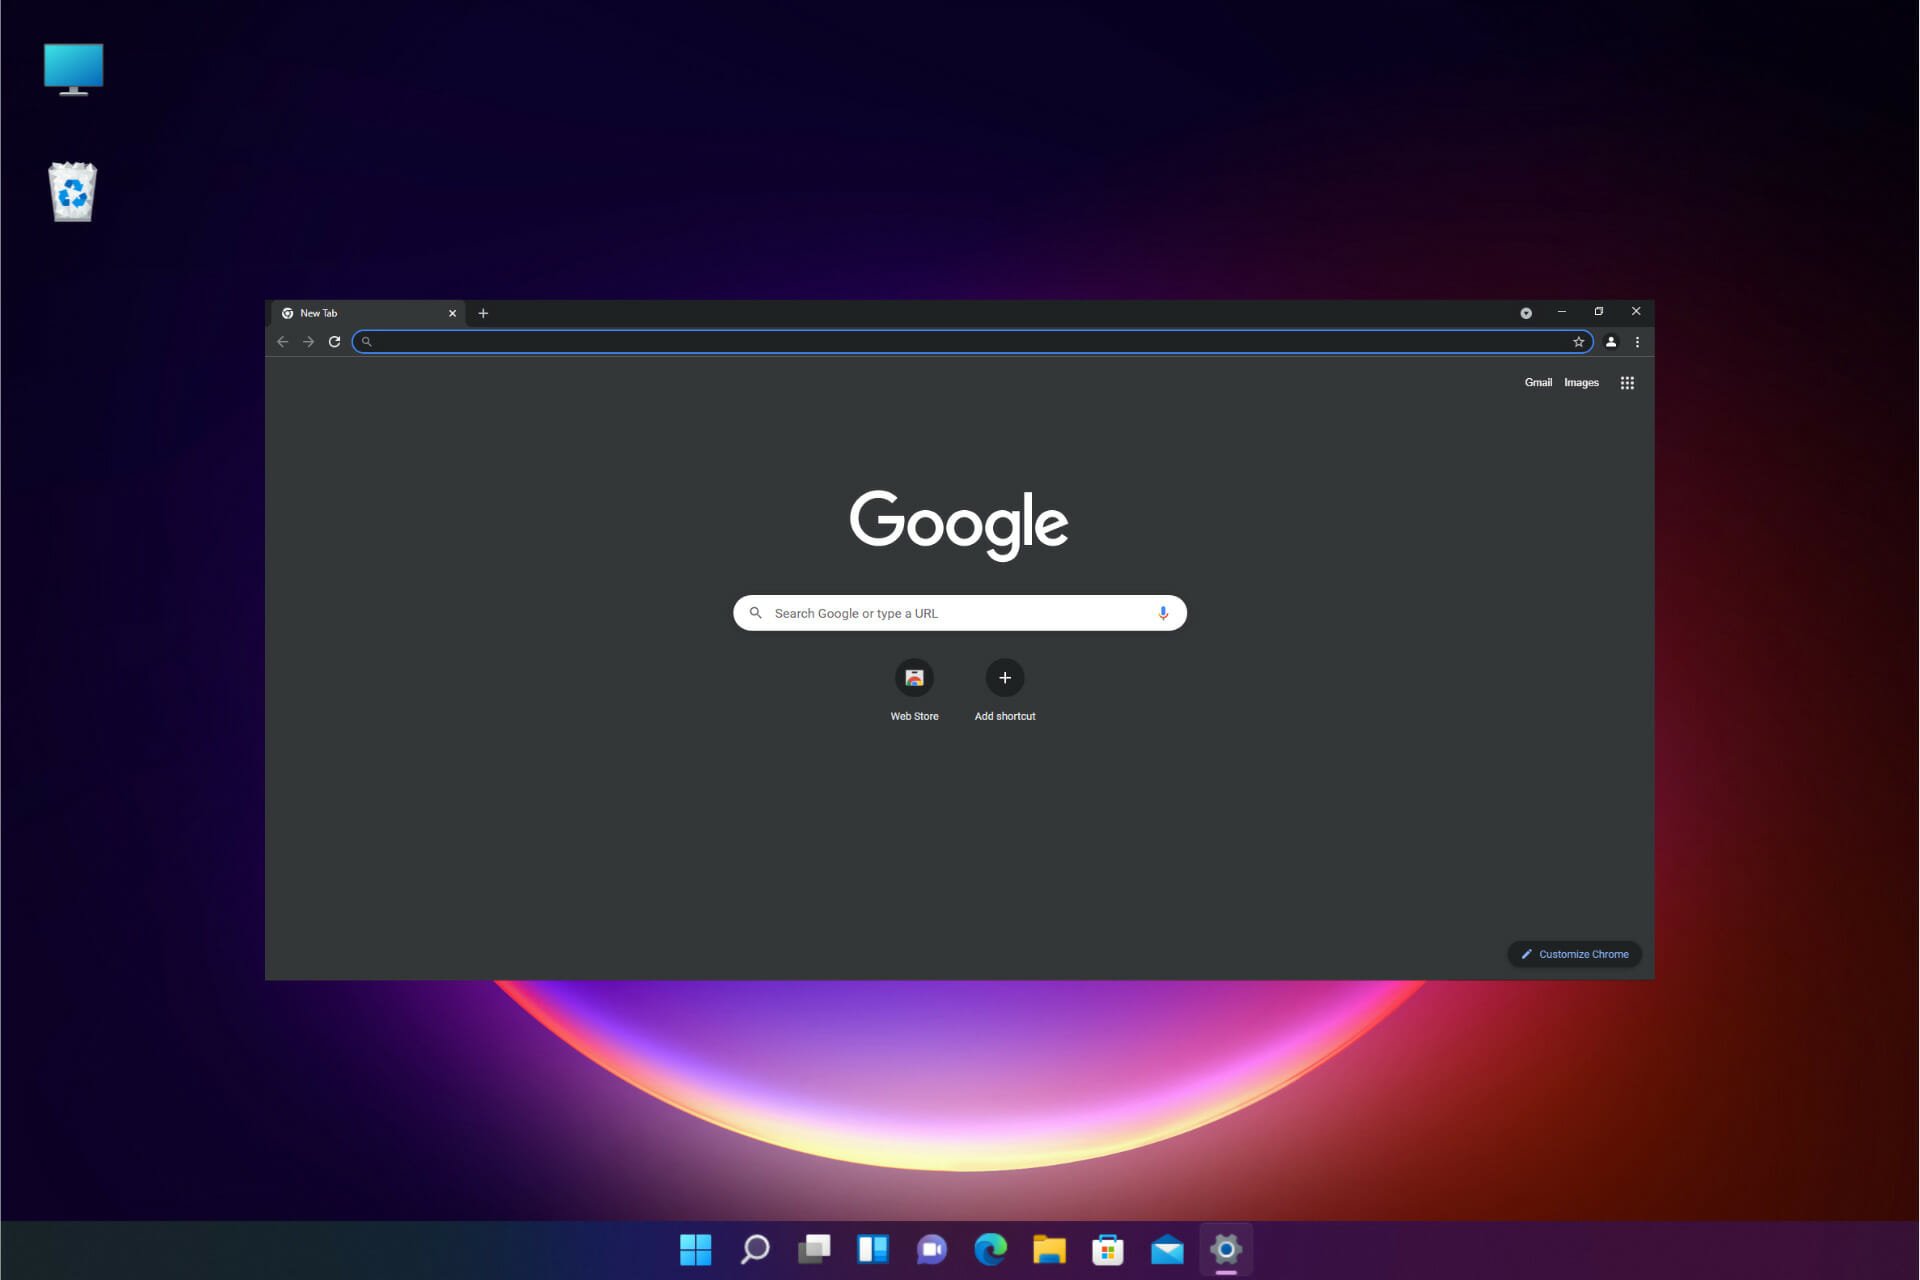 How to fix slow Chrome in Windows 11